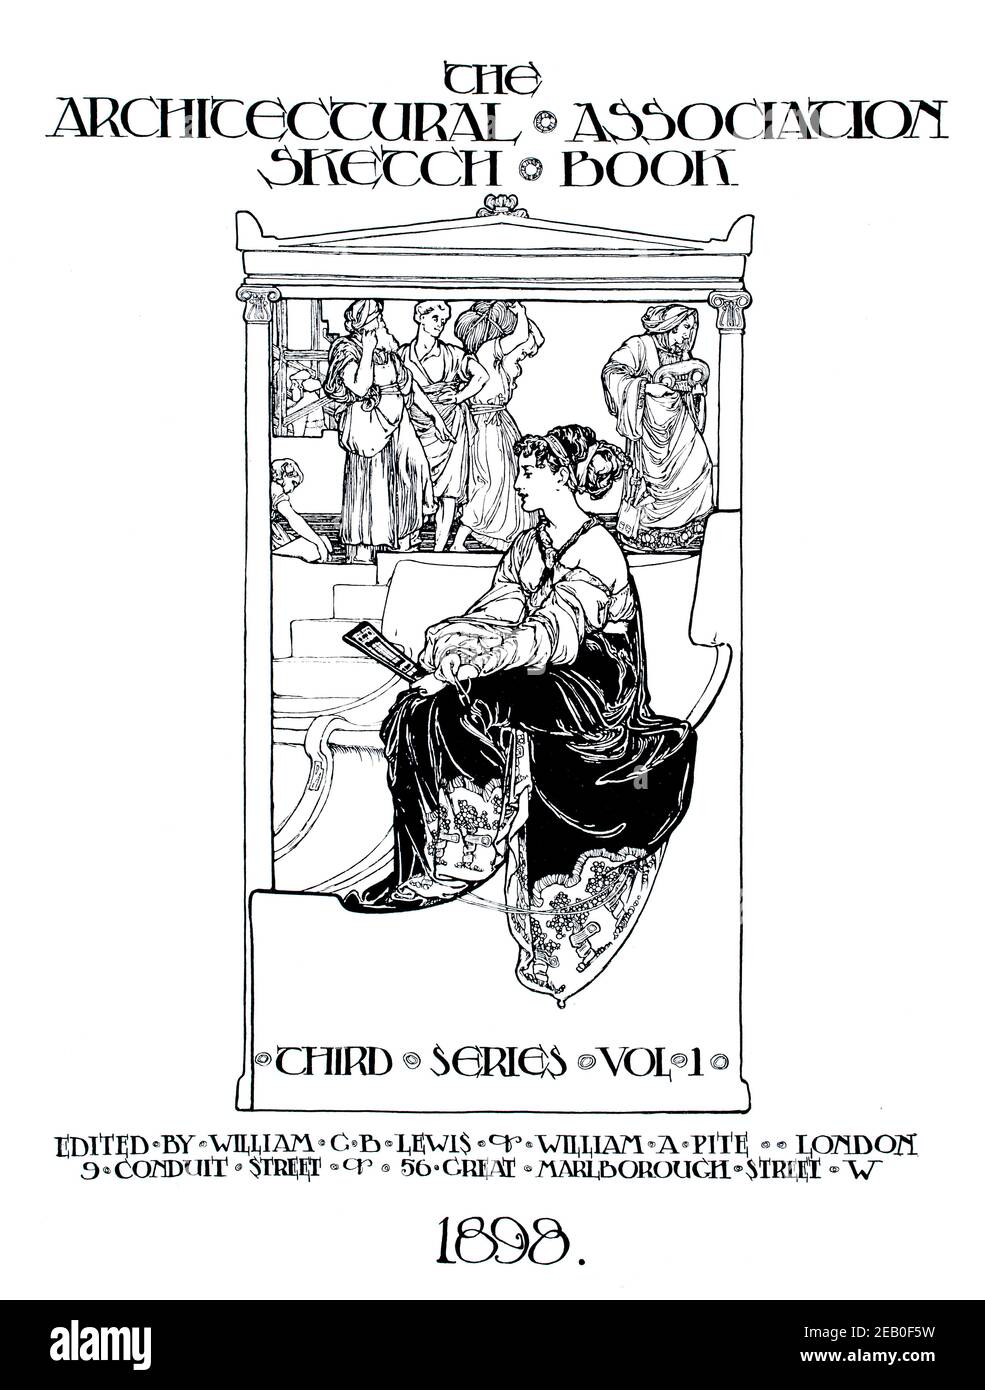 Architectural Association sketch book, title page design by George Murray in 1898 The Studio an Illustrated Magazine of Fine and Applied Art Stock Photo